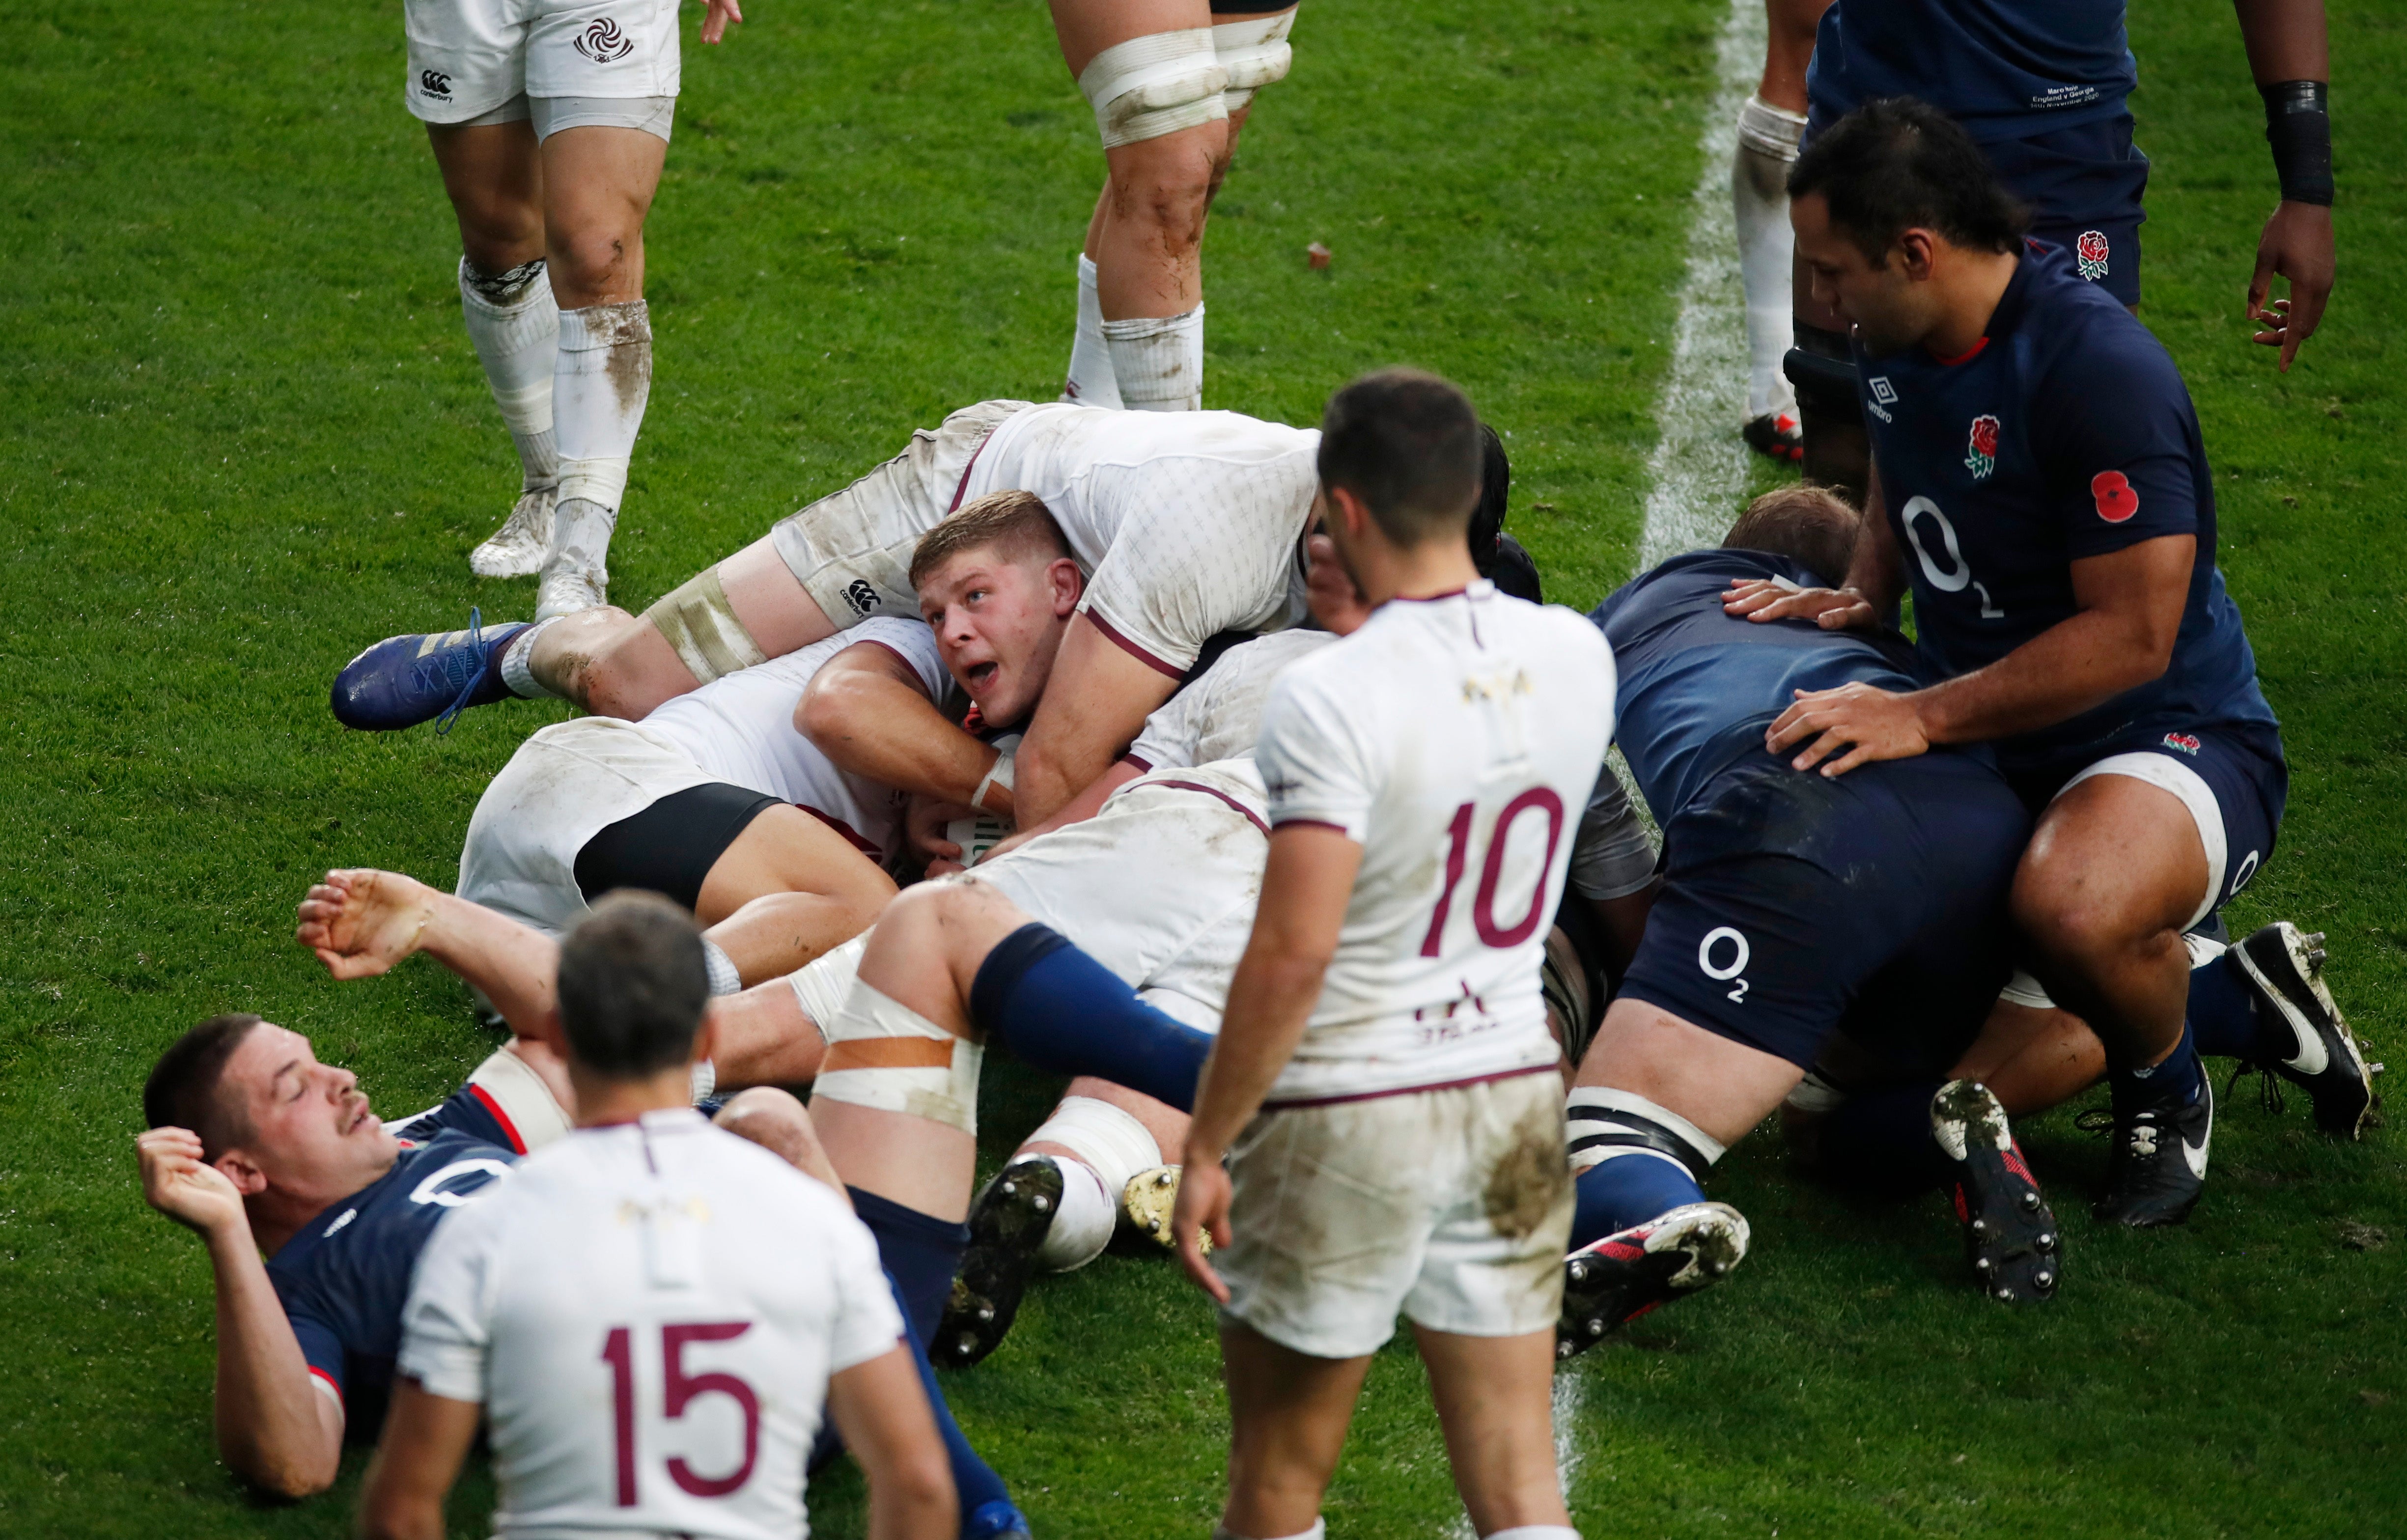 Willis scored his maiden England try 13 minutes into his debut